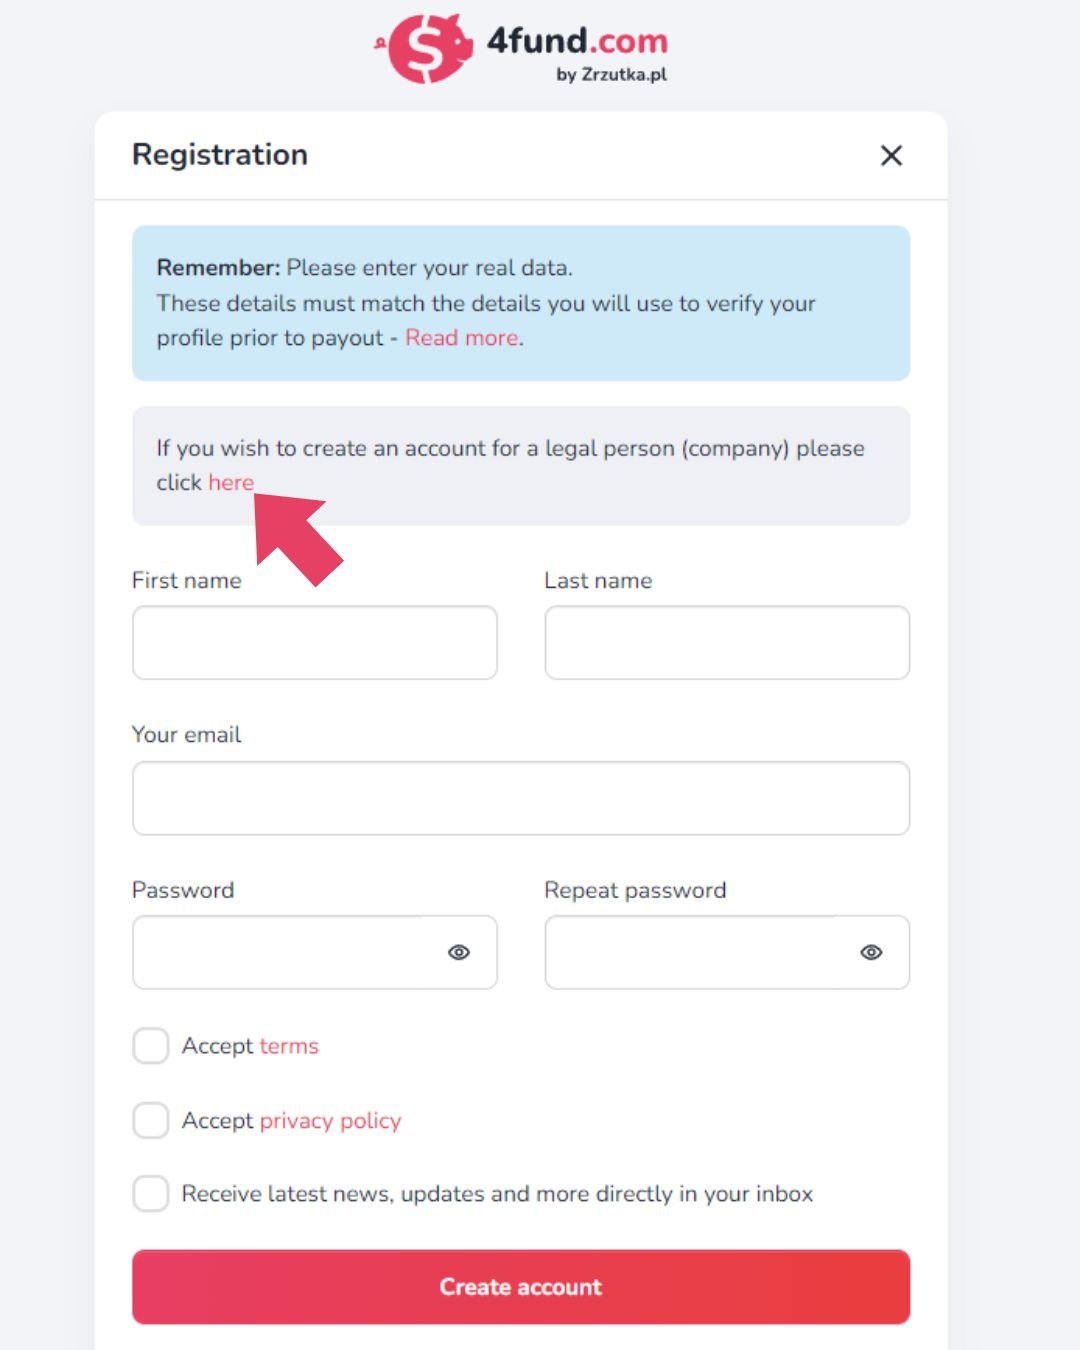 The screenshot shows a button on the form, leading to the registration of the organisation's account.